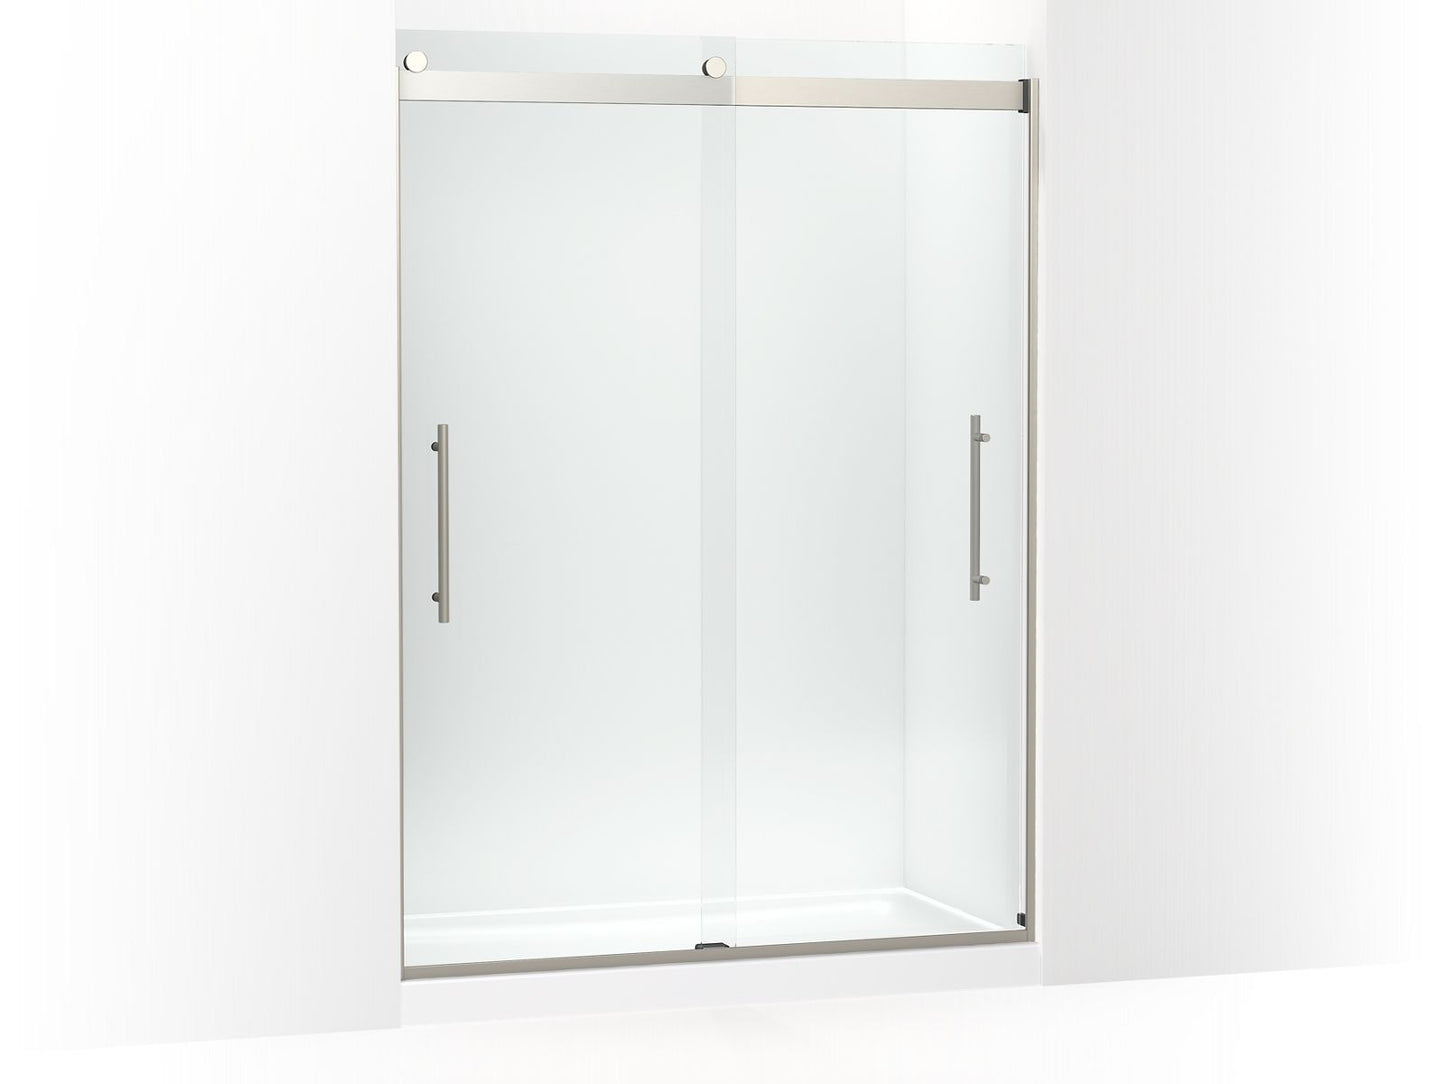 KOHLER K-702429-L-BNK Levity Plus Frameless Sliding Shower Door, 81-5/8" H X 56-5/8 - 59-5/8" W, With 3/8"-Thick Crystal Clear Glass In Anodized Brushed Nickel